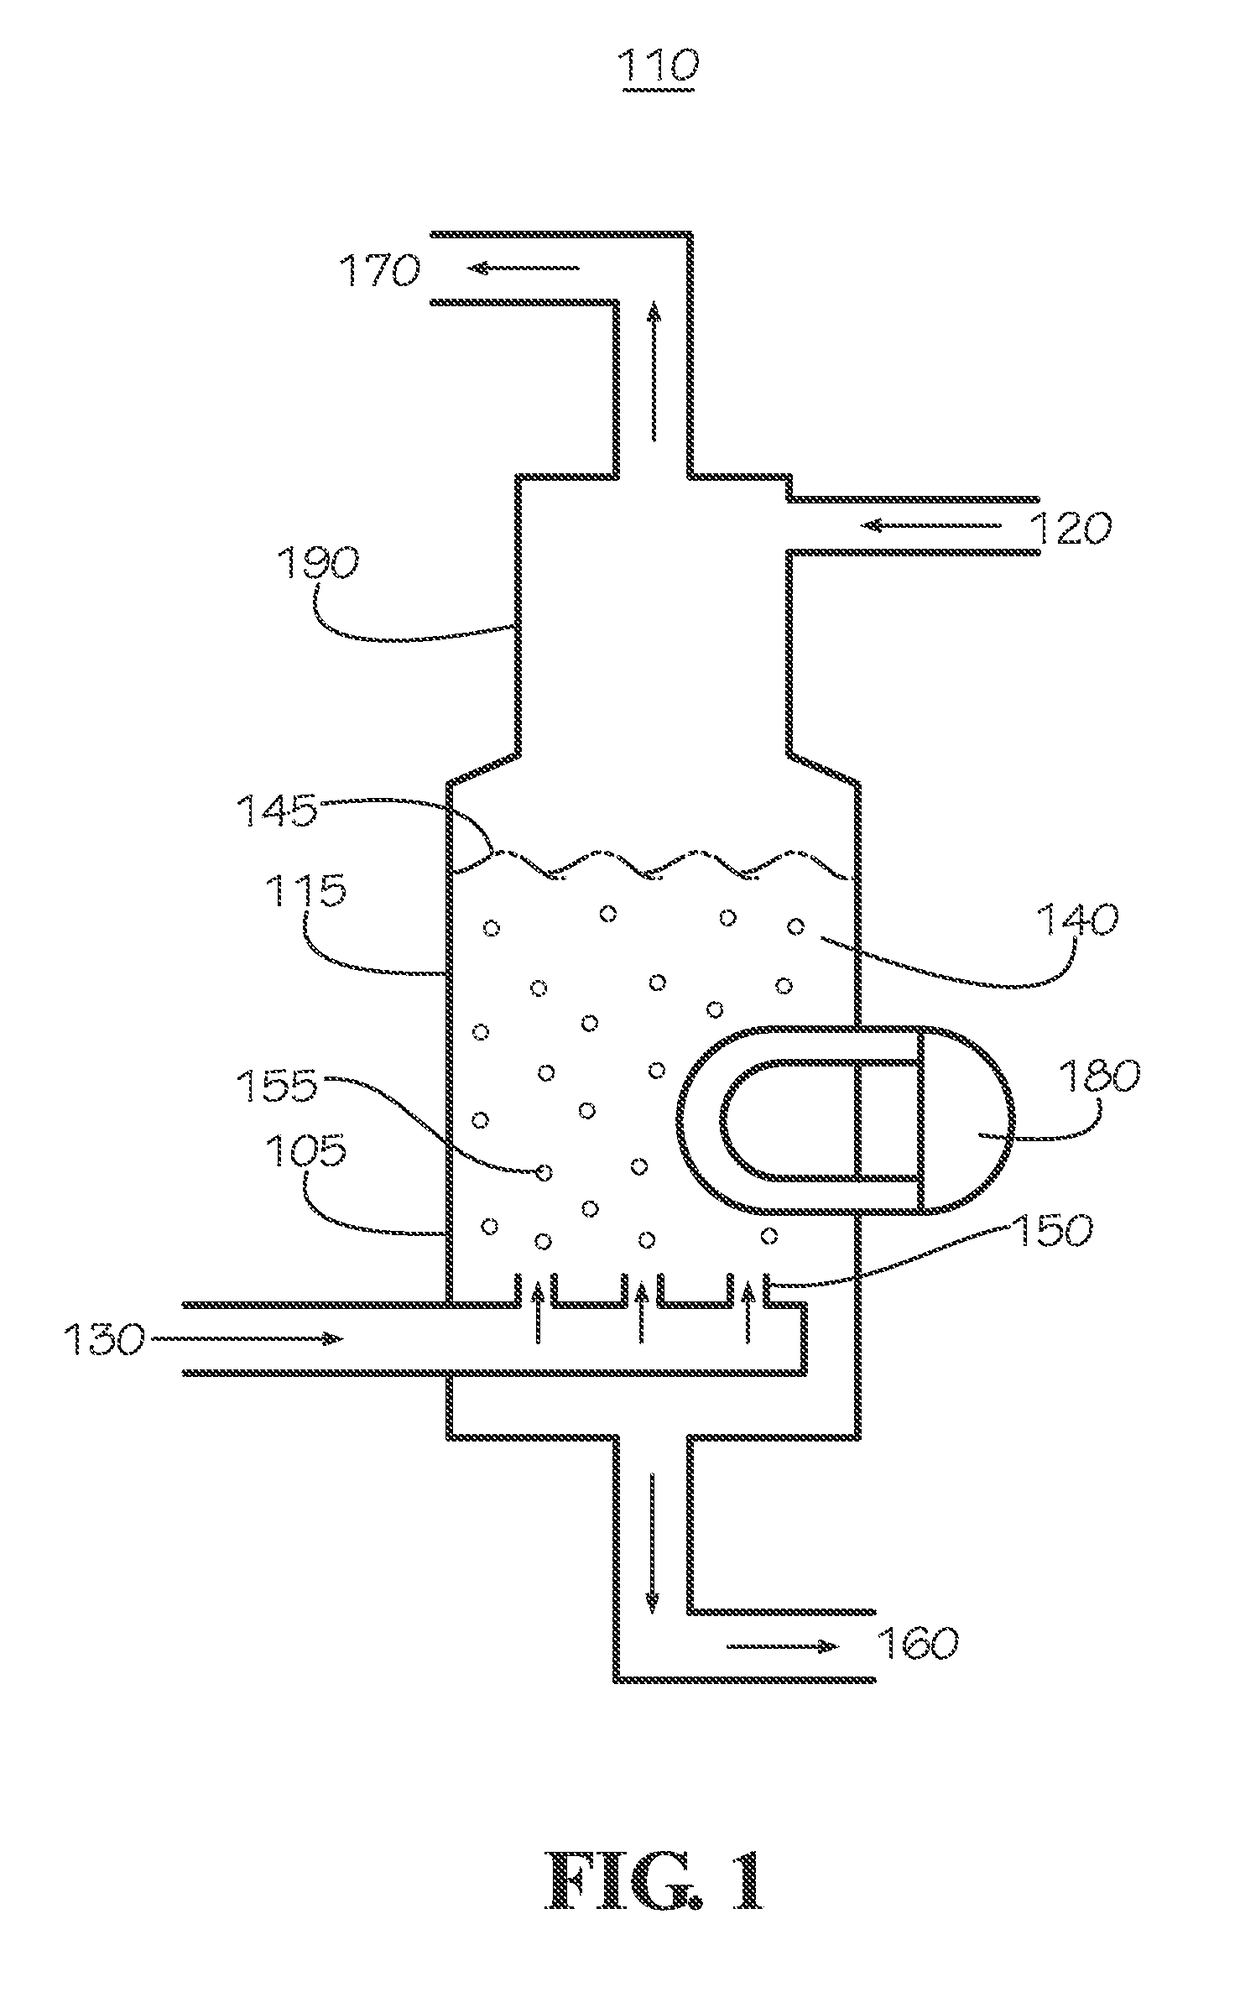 Hydrogen Sulfide Production Process and Related Reactor Vessels